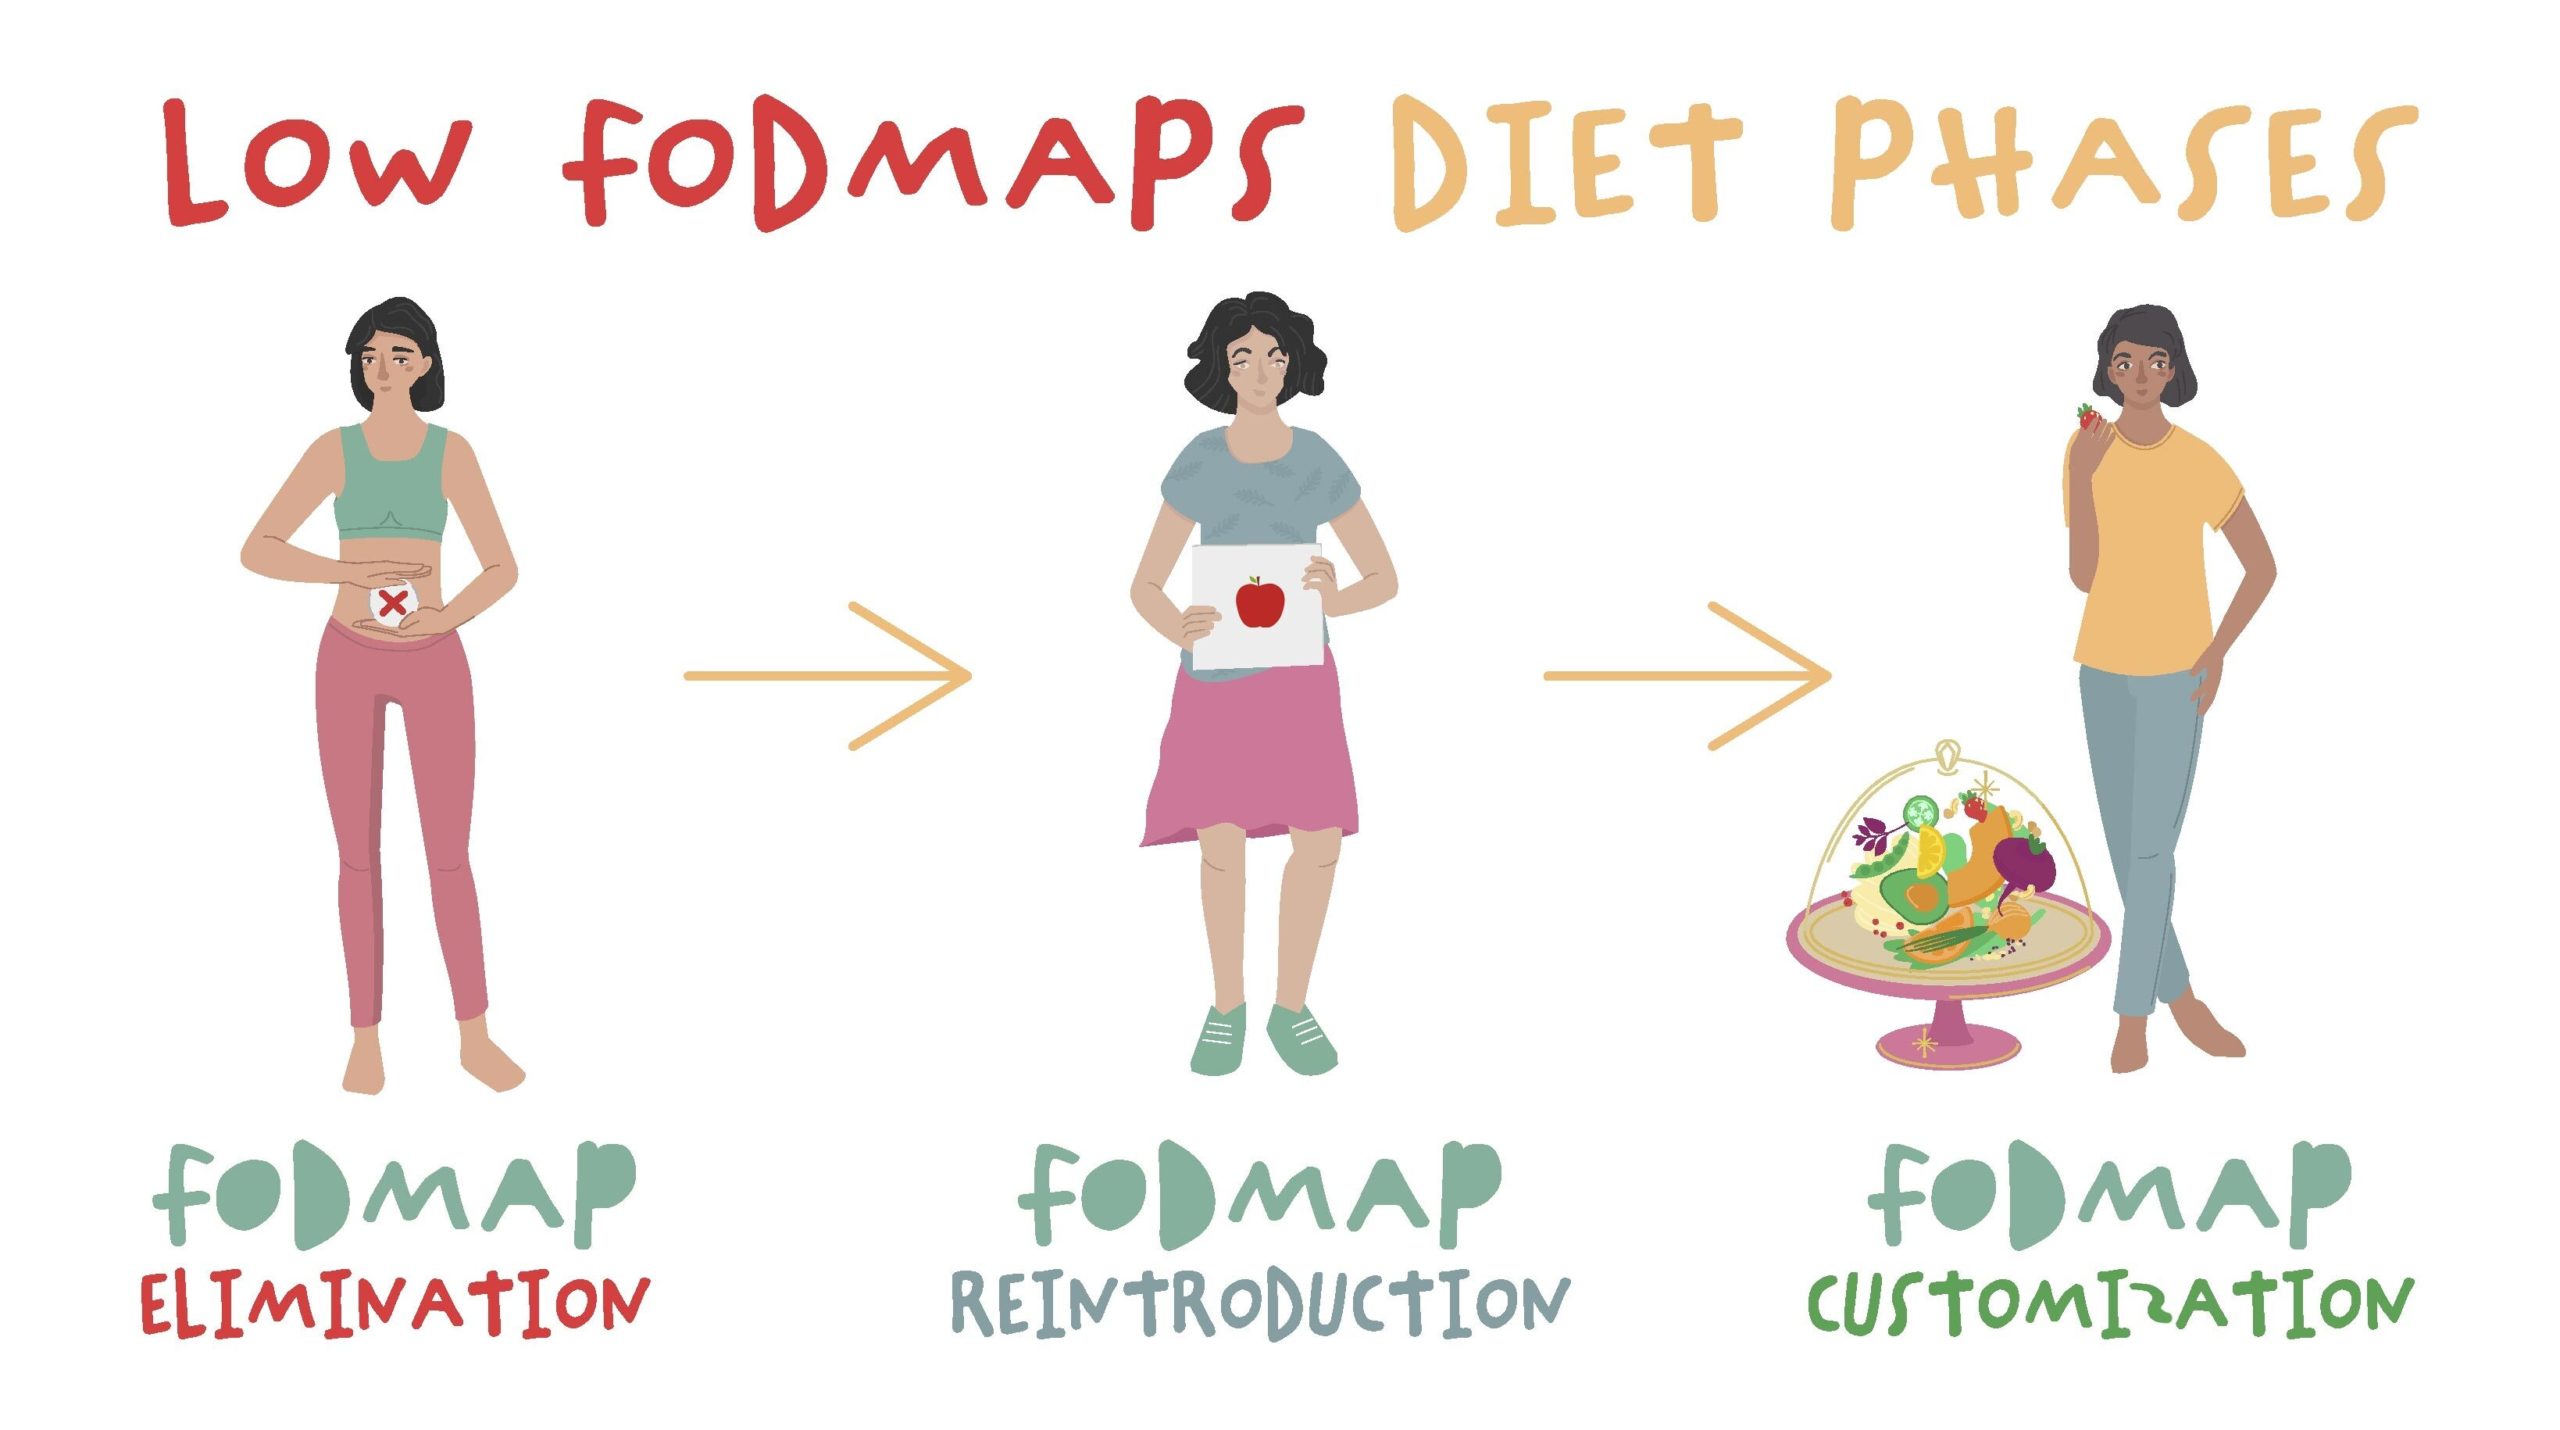 Cartoon woman with gut health issues below the words "low FODMAP diet phases"